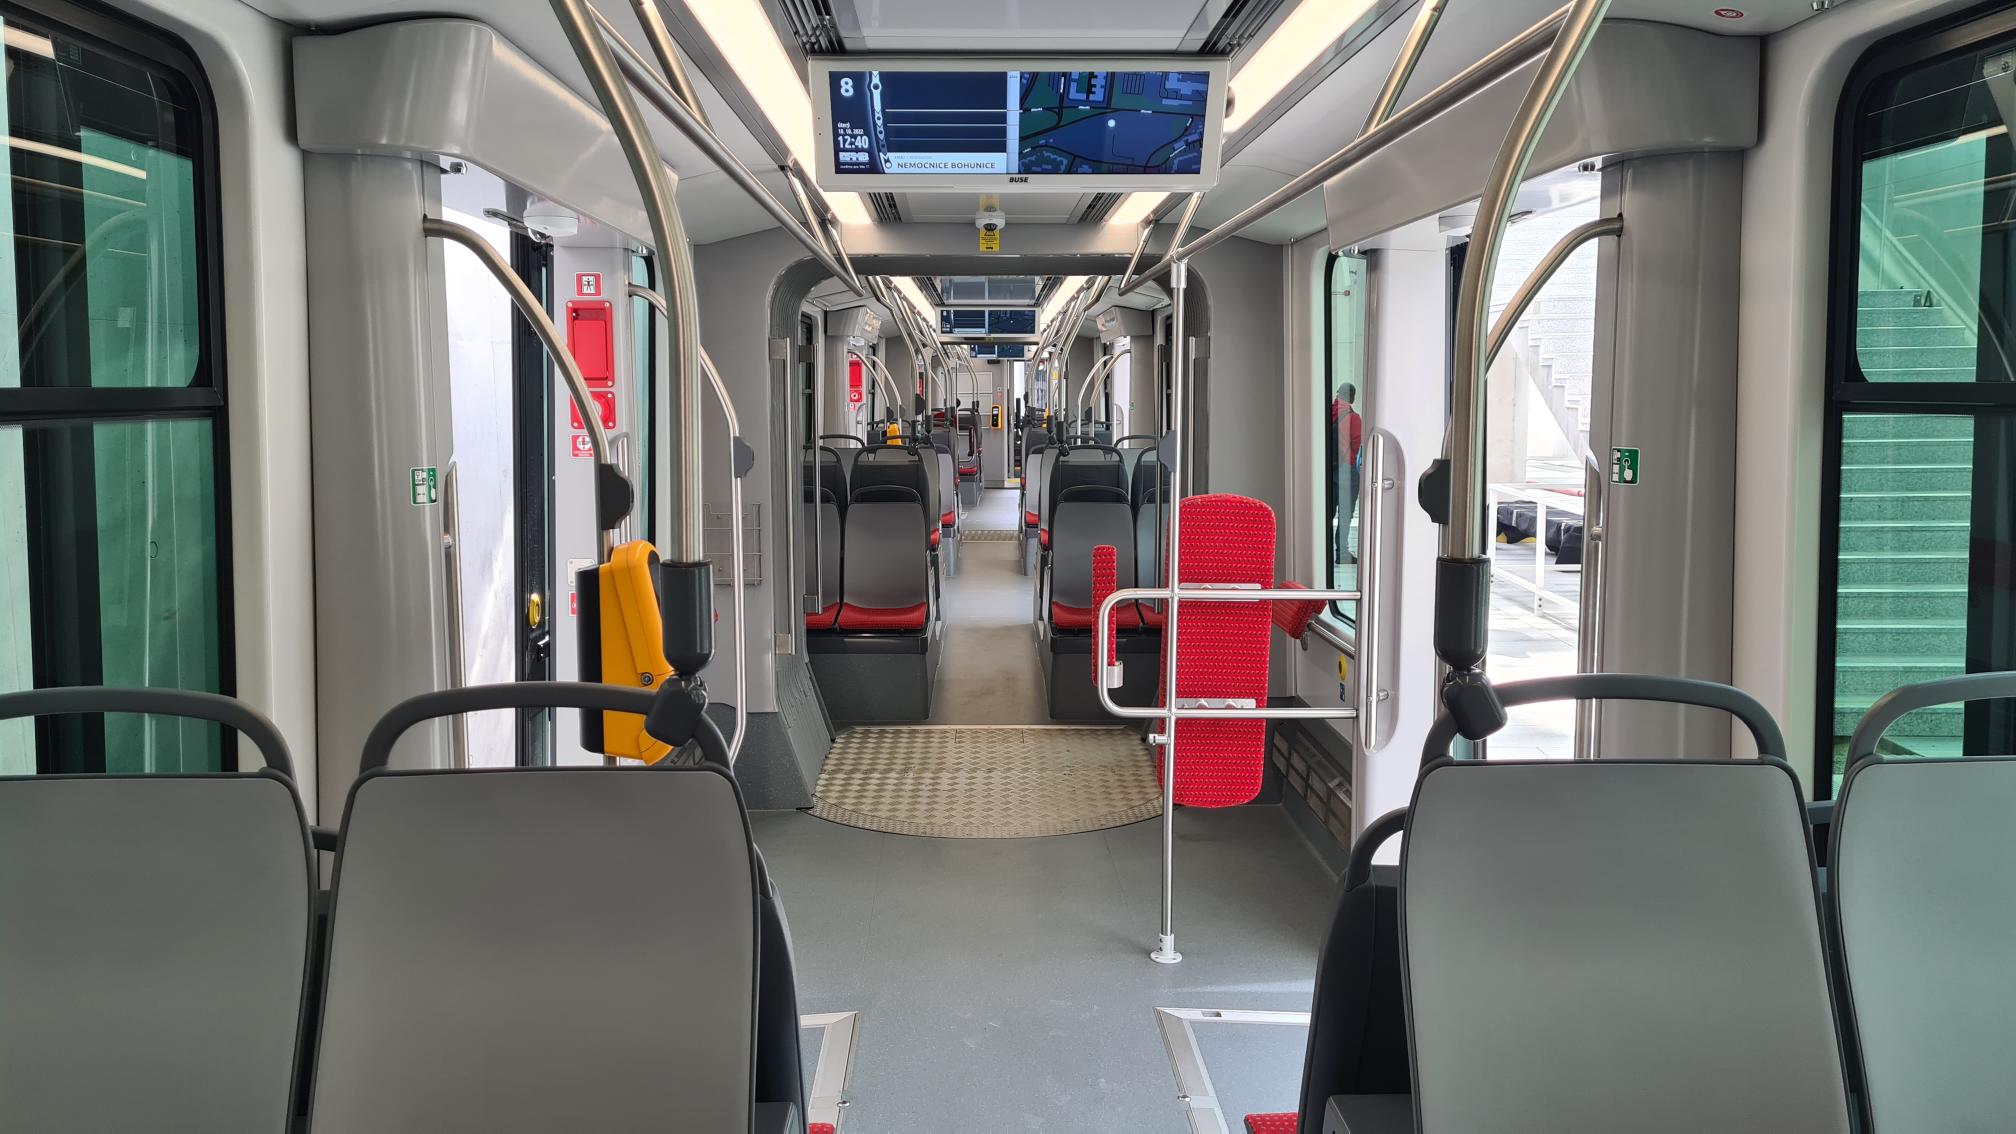 The interior of the new ForCity trams